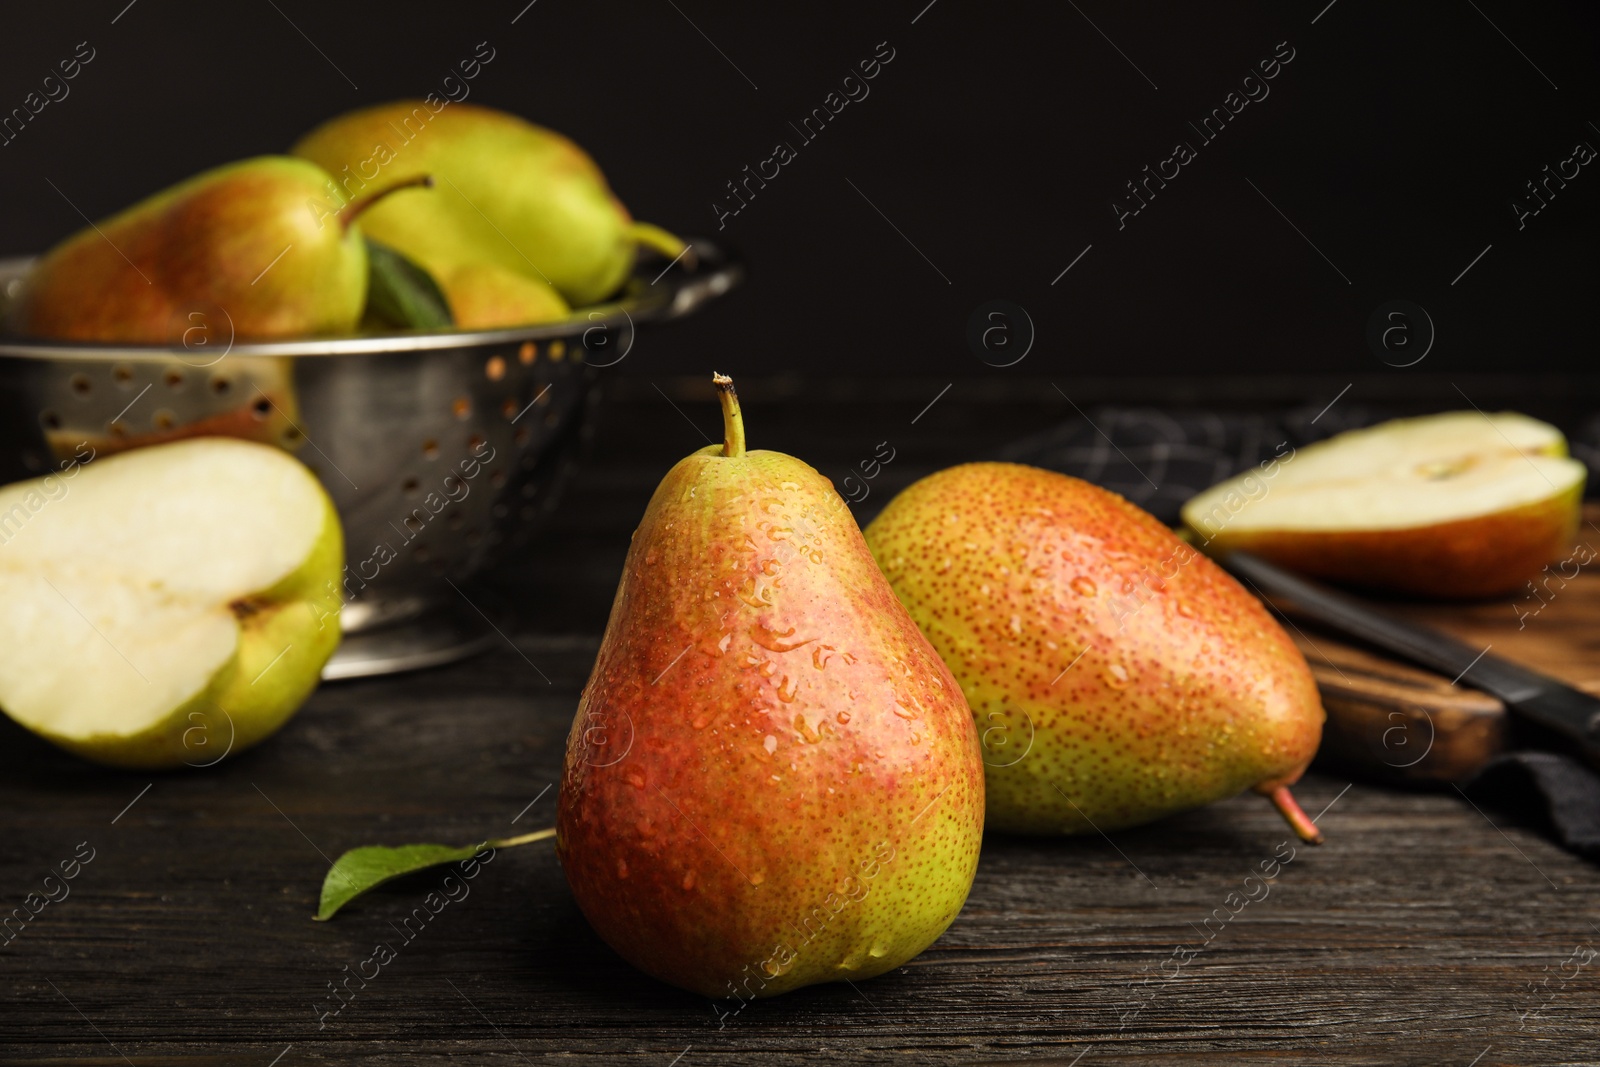 Photo of Ripe juicy pears on dark wooden table against black background